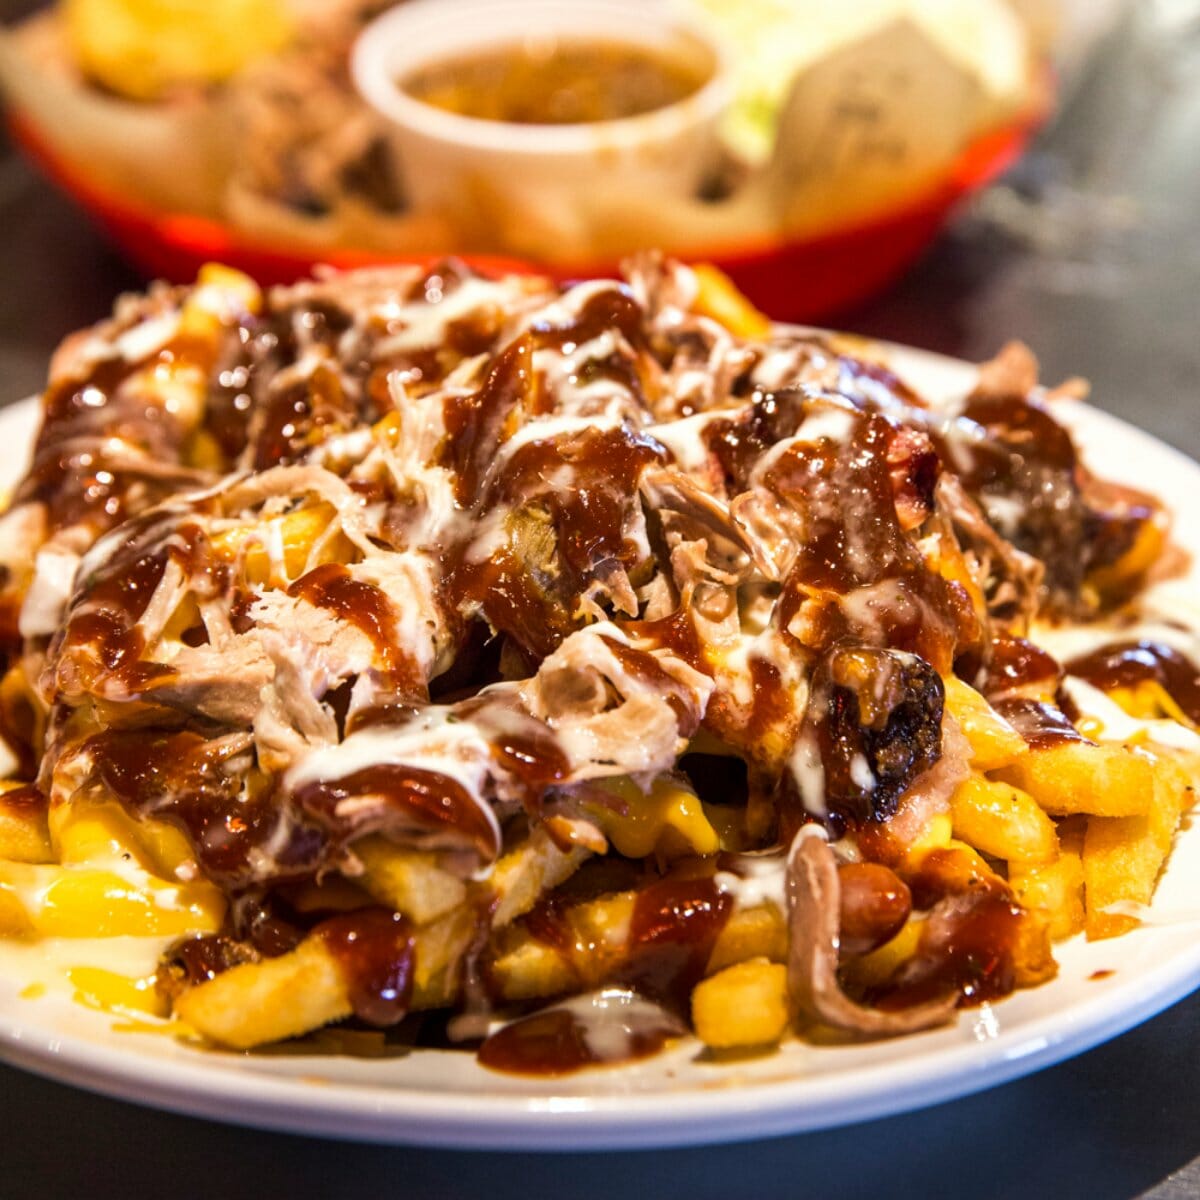 Barbecue chicken on french fries named "Frychos"